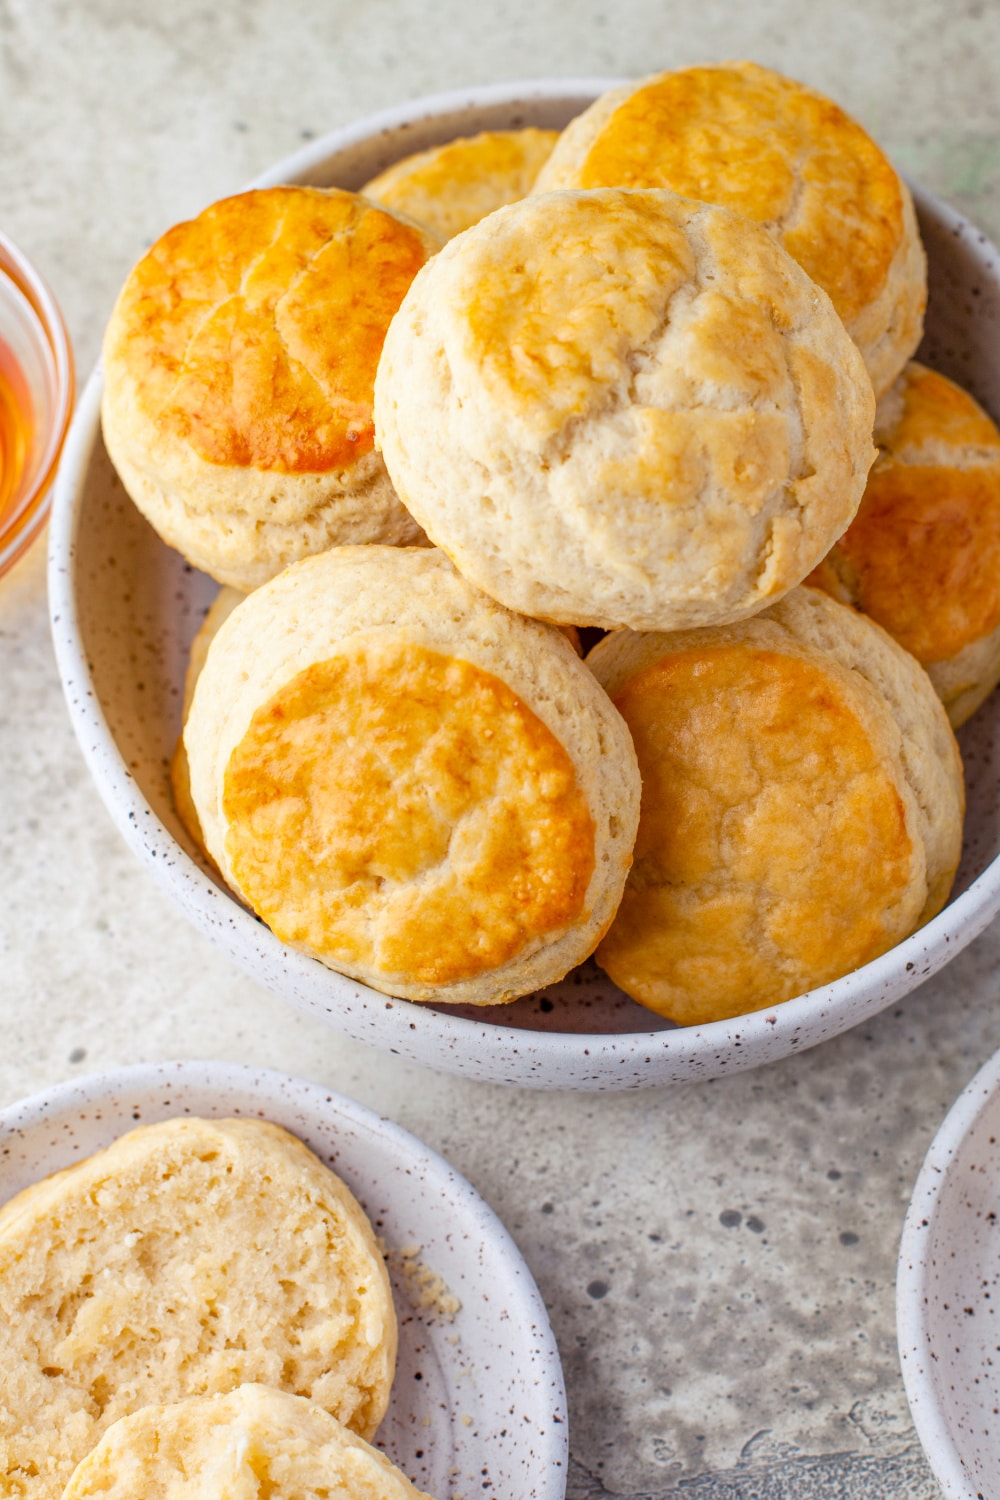 Biscuits piled high in a white bowl.